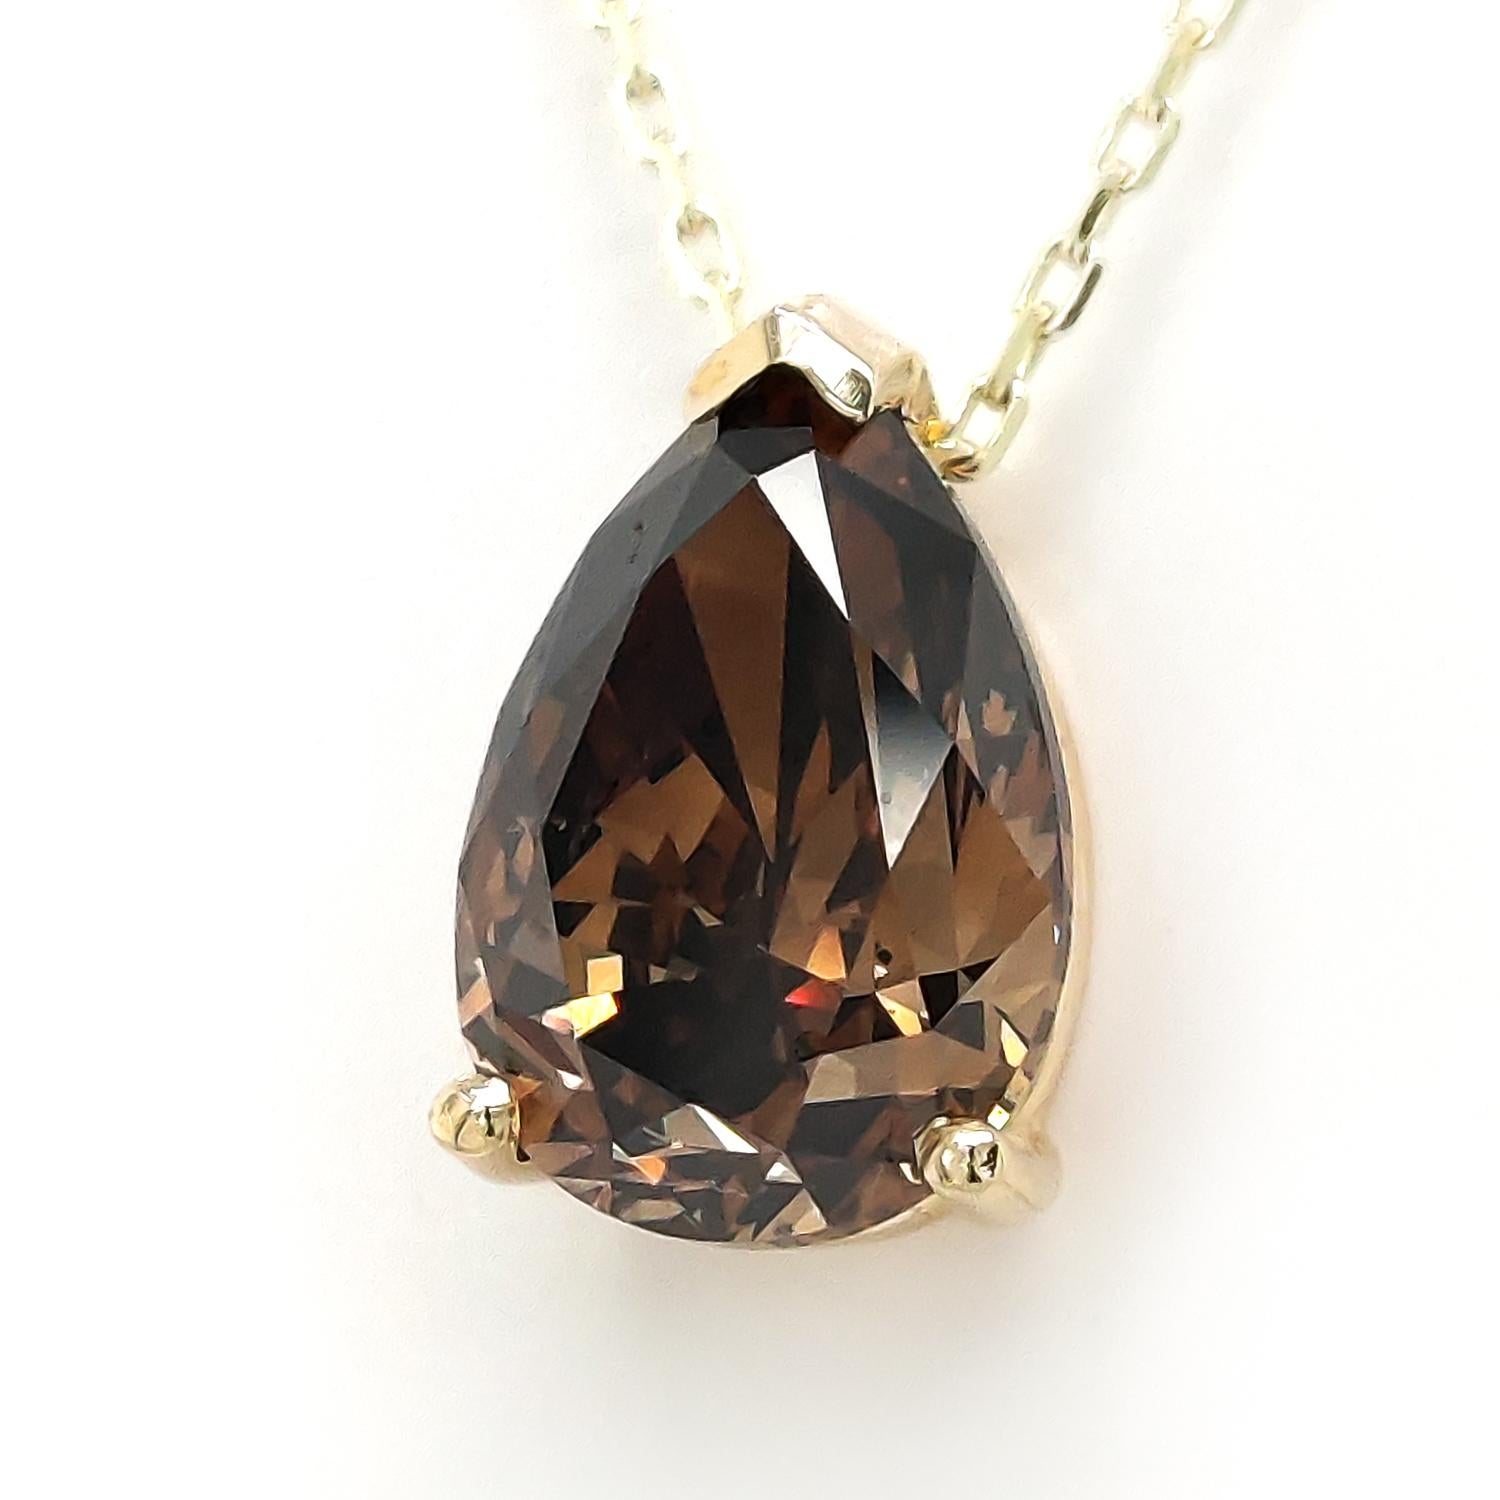 FOR THE US CUSTOMERS NO VAT.

The mesmerizing pear shape fancy deep orangy brown diamond, totaling 2.01 ct, set in 14kt yellow gold, will look amazing with your every outfit. 
For more information please see the attached certificate. 

